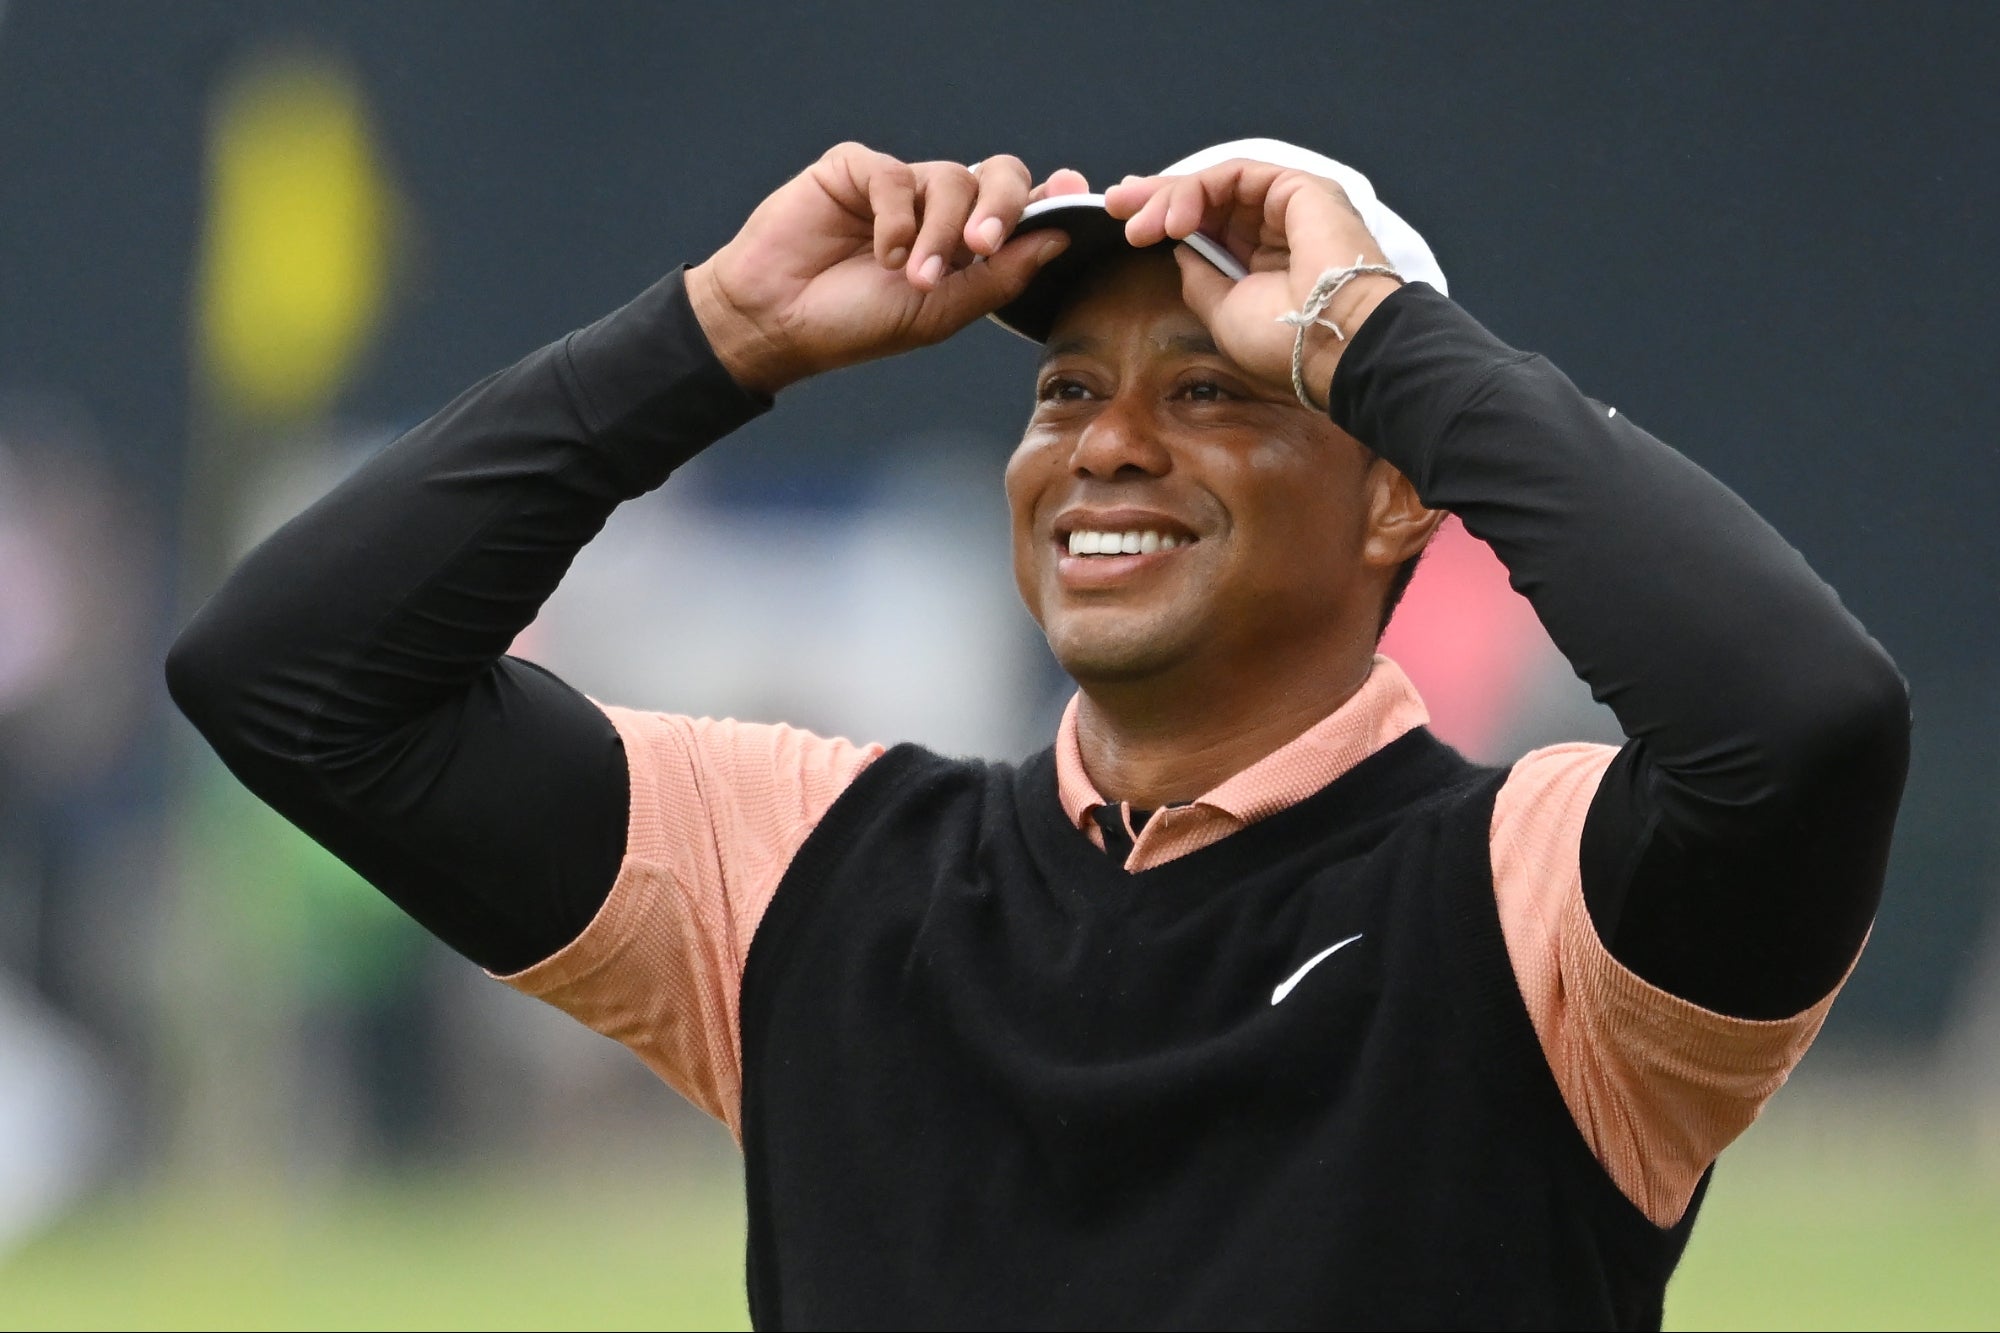 What Makes Businesses and Athletes Like Tiger Woods Successful? It Comes Down to Having These 4 Players on Your Team